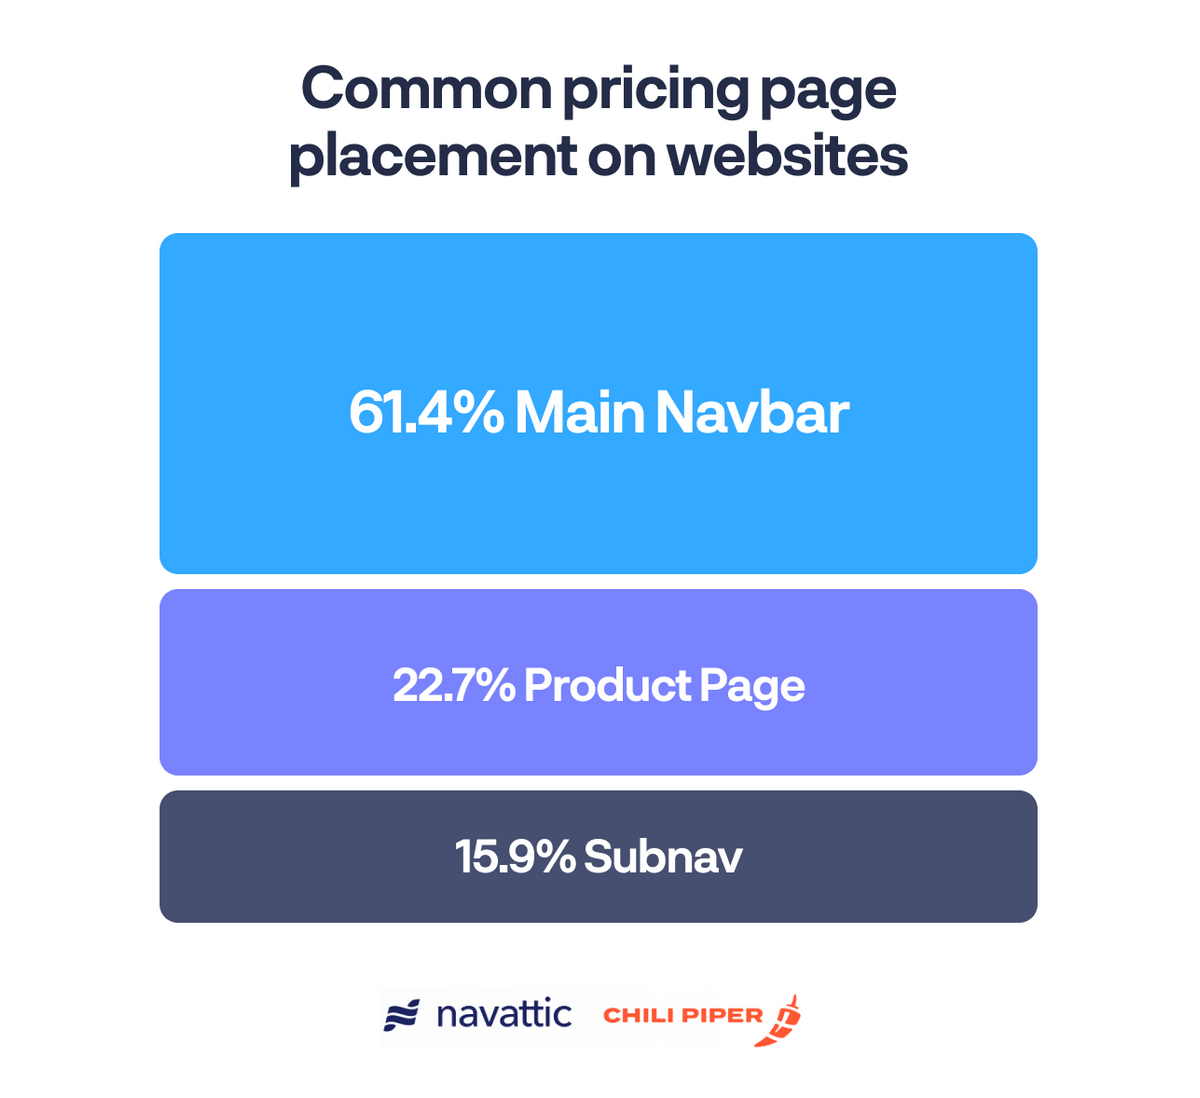 Pricing page location breakdown